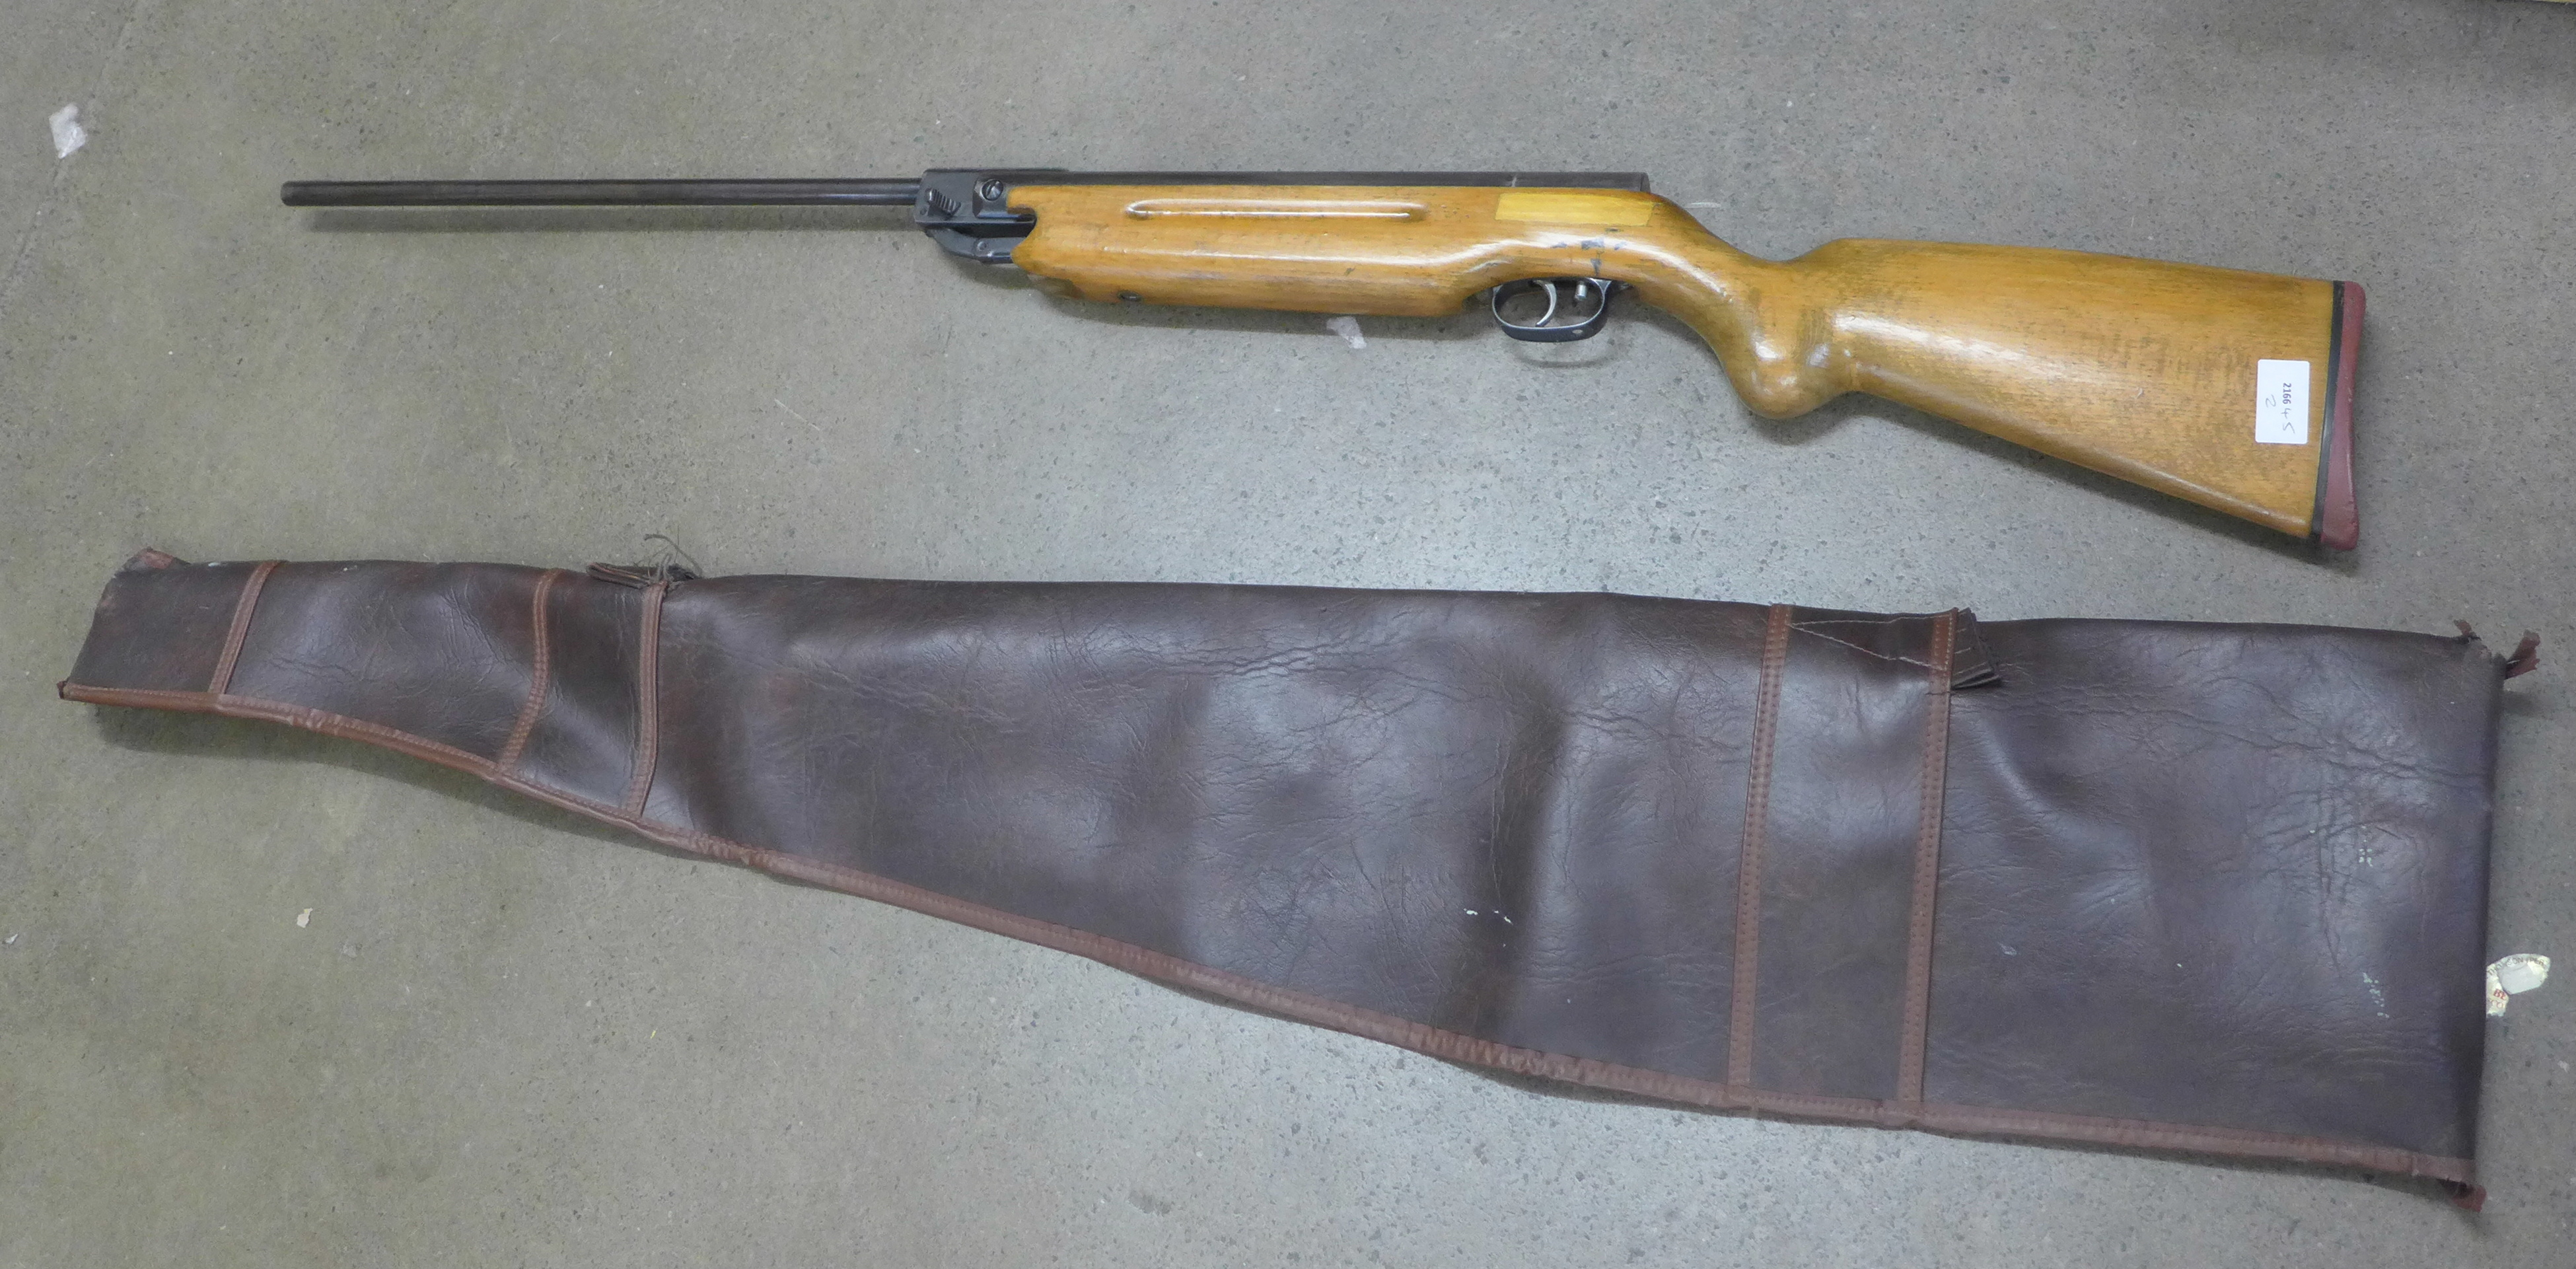 A Weihrauch HW35 .22 target shooting air rifle, circa 1975, repairs to the stock, (13mm scope